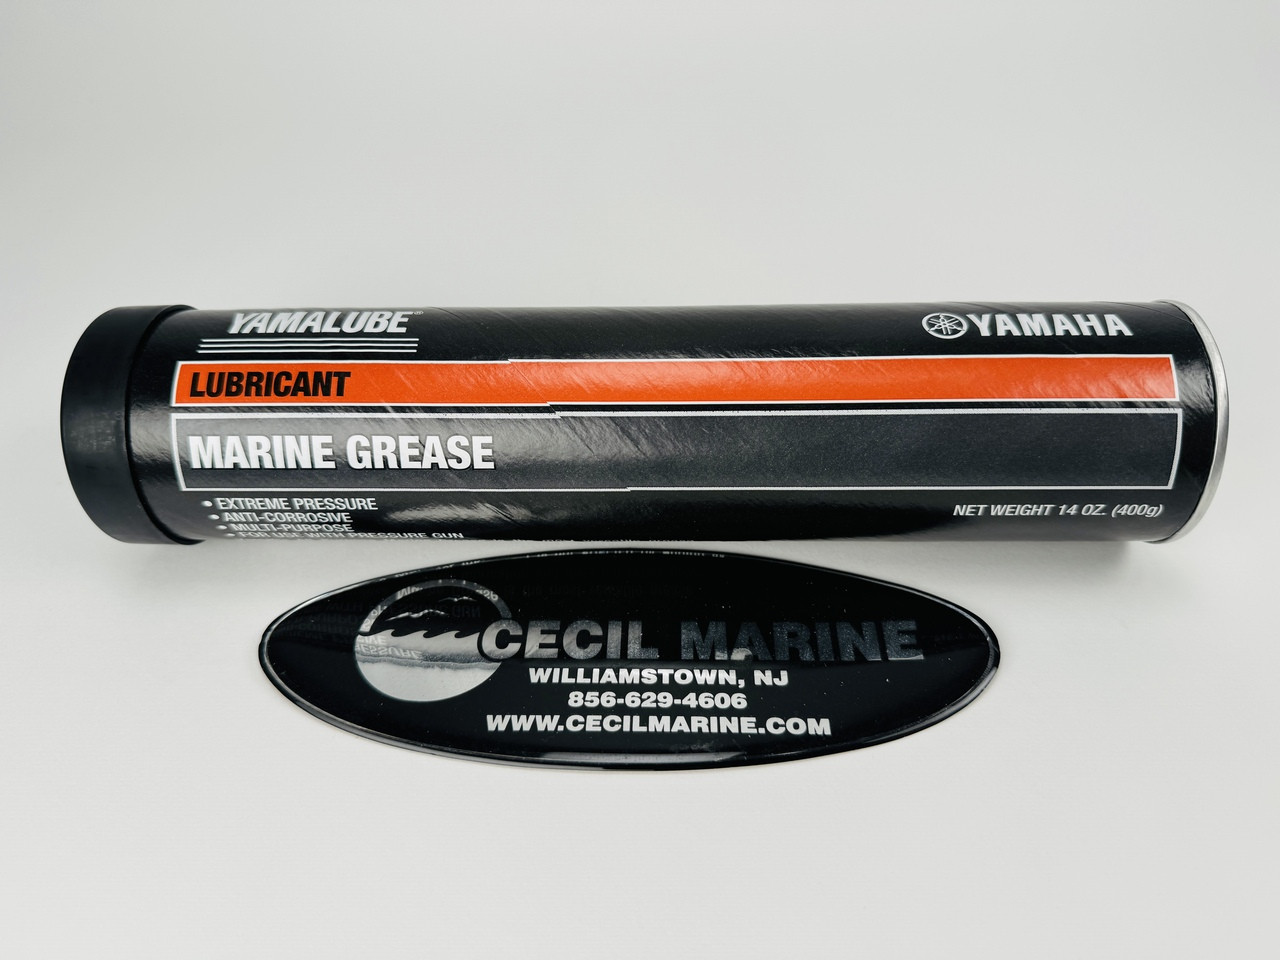 $11.99*  GENUINE YAMAHA no tax* MARINE GREASE 14.1OZ - ACC-GREAS-14-CT  *In Stock & Ready To Ship!